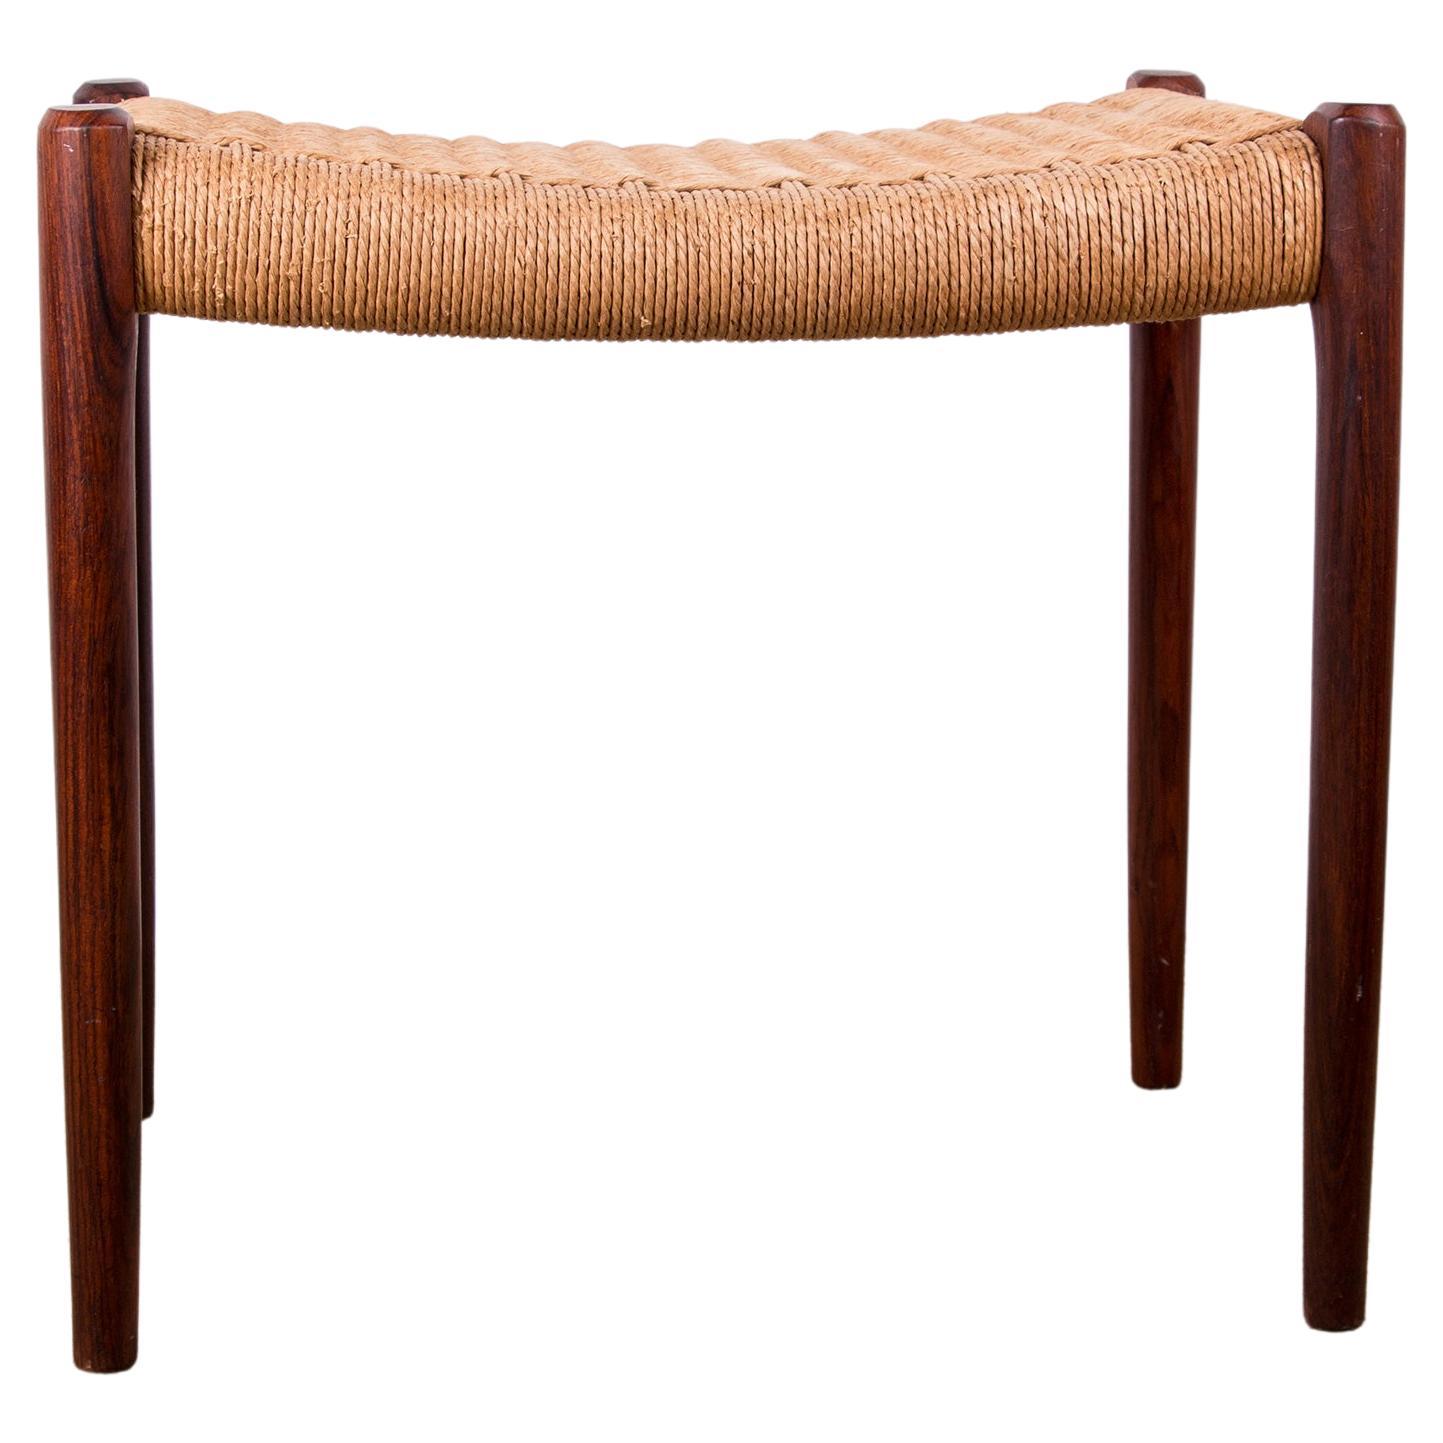 Danish Rio Rosewood & Rope Model 80 Stool by Niels Otto Moller, 1960